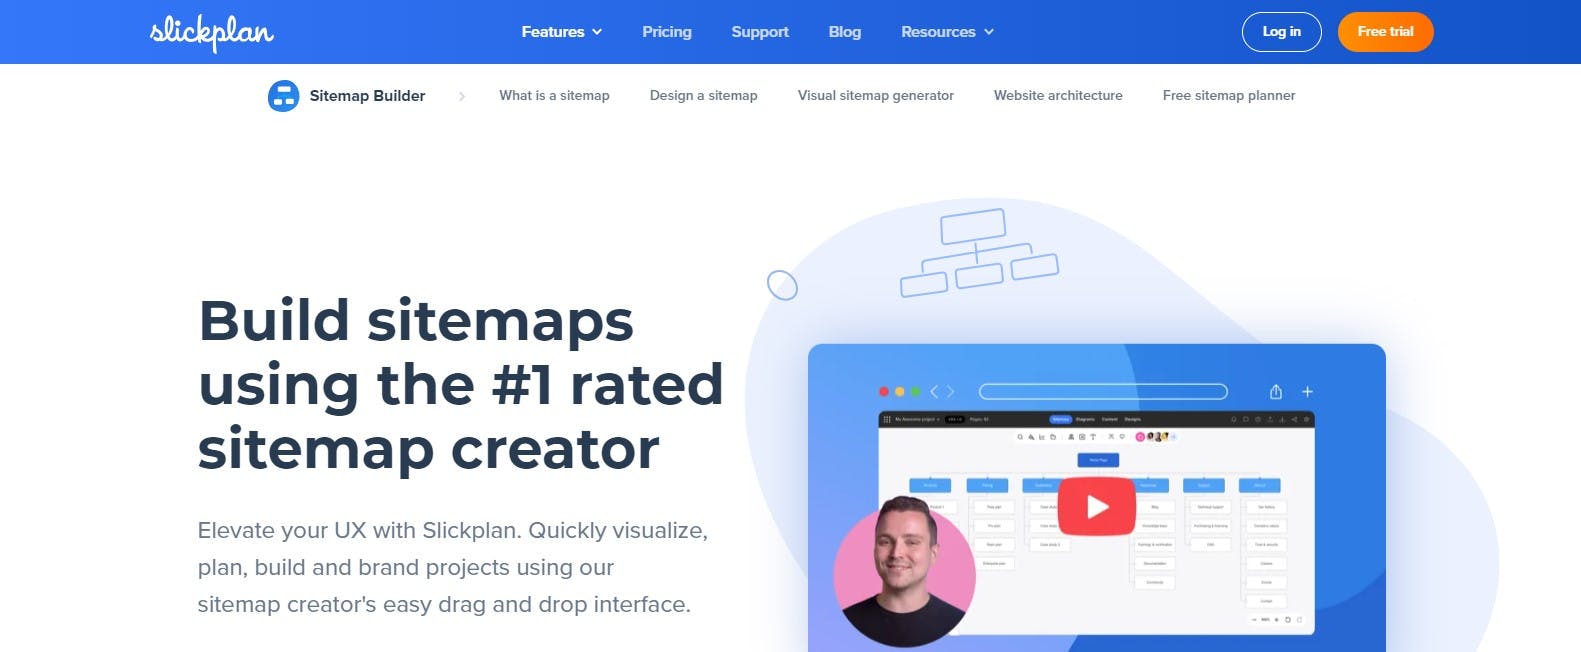 Build sitemaps using the top rated Slickplan 